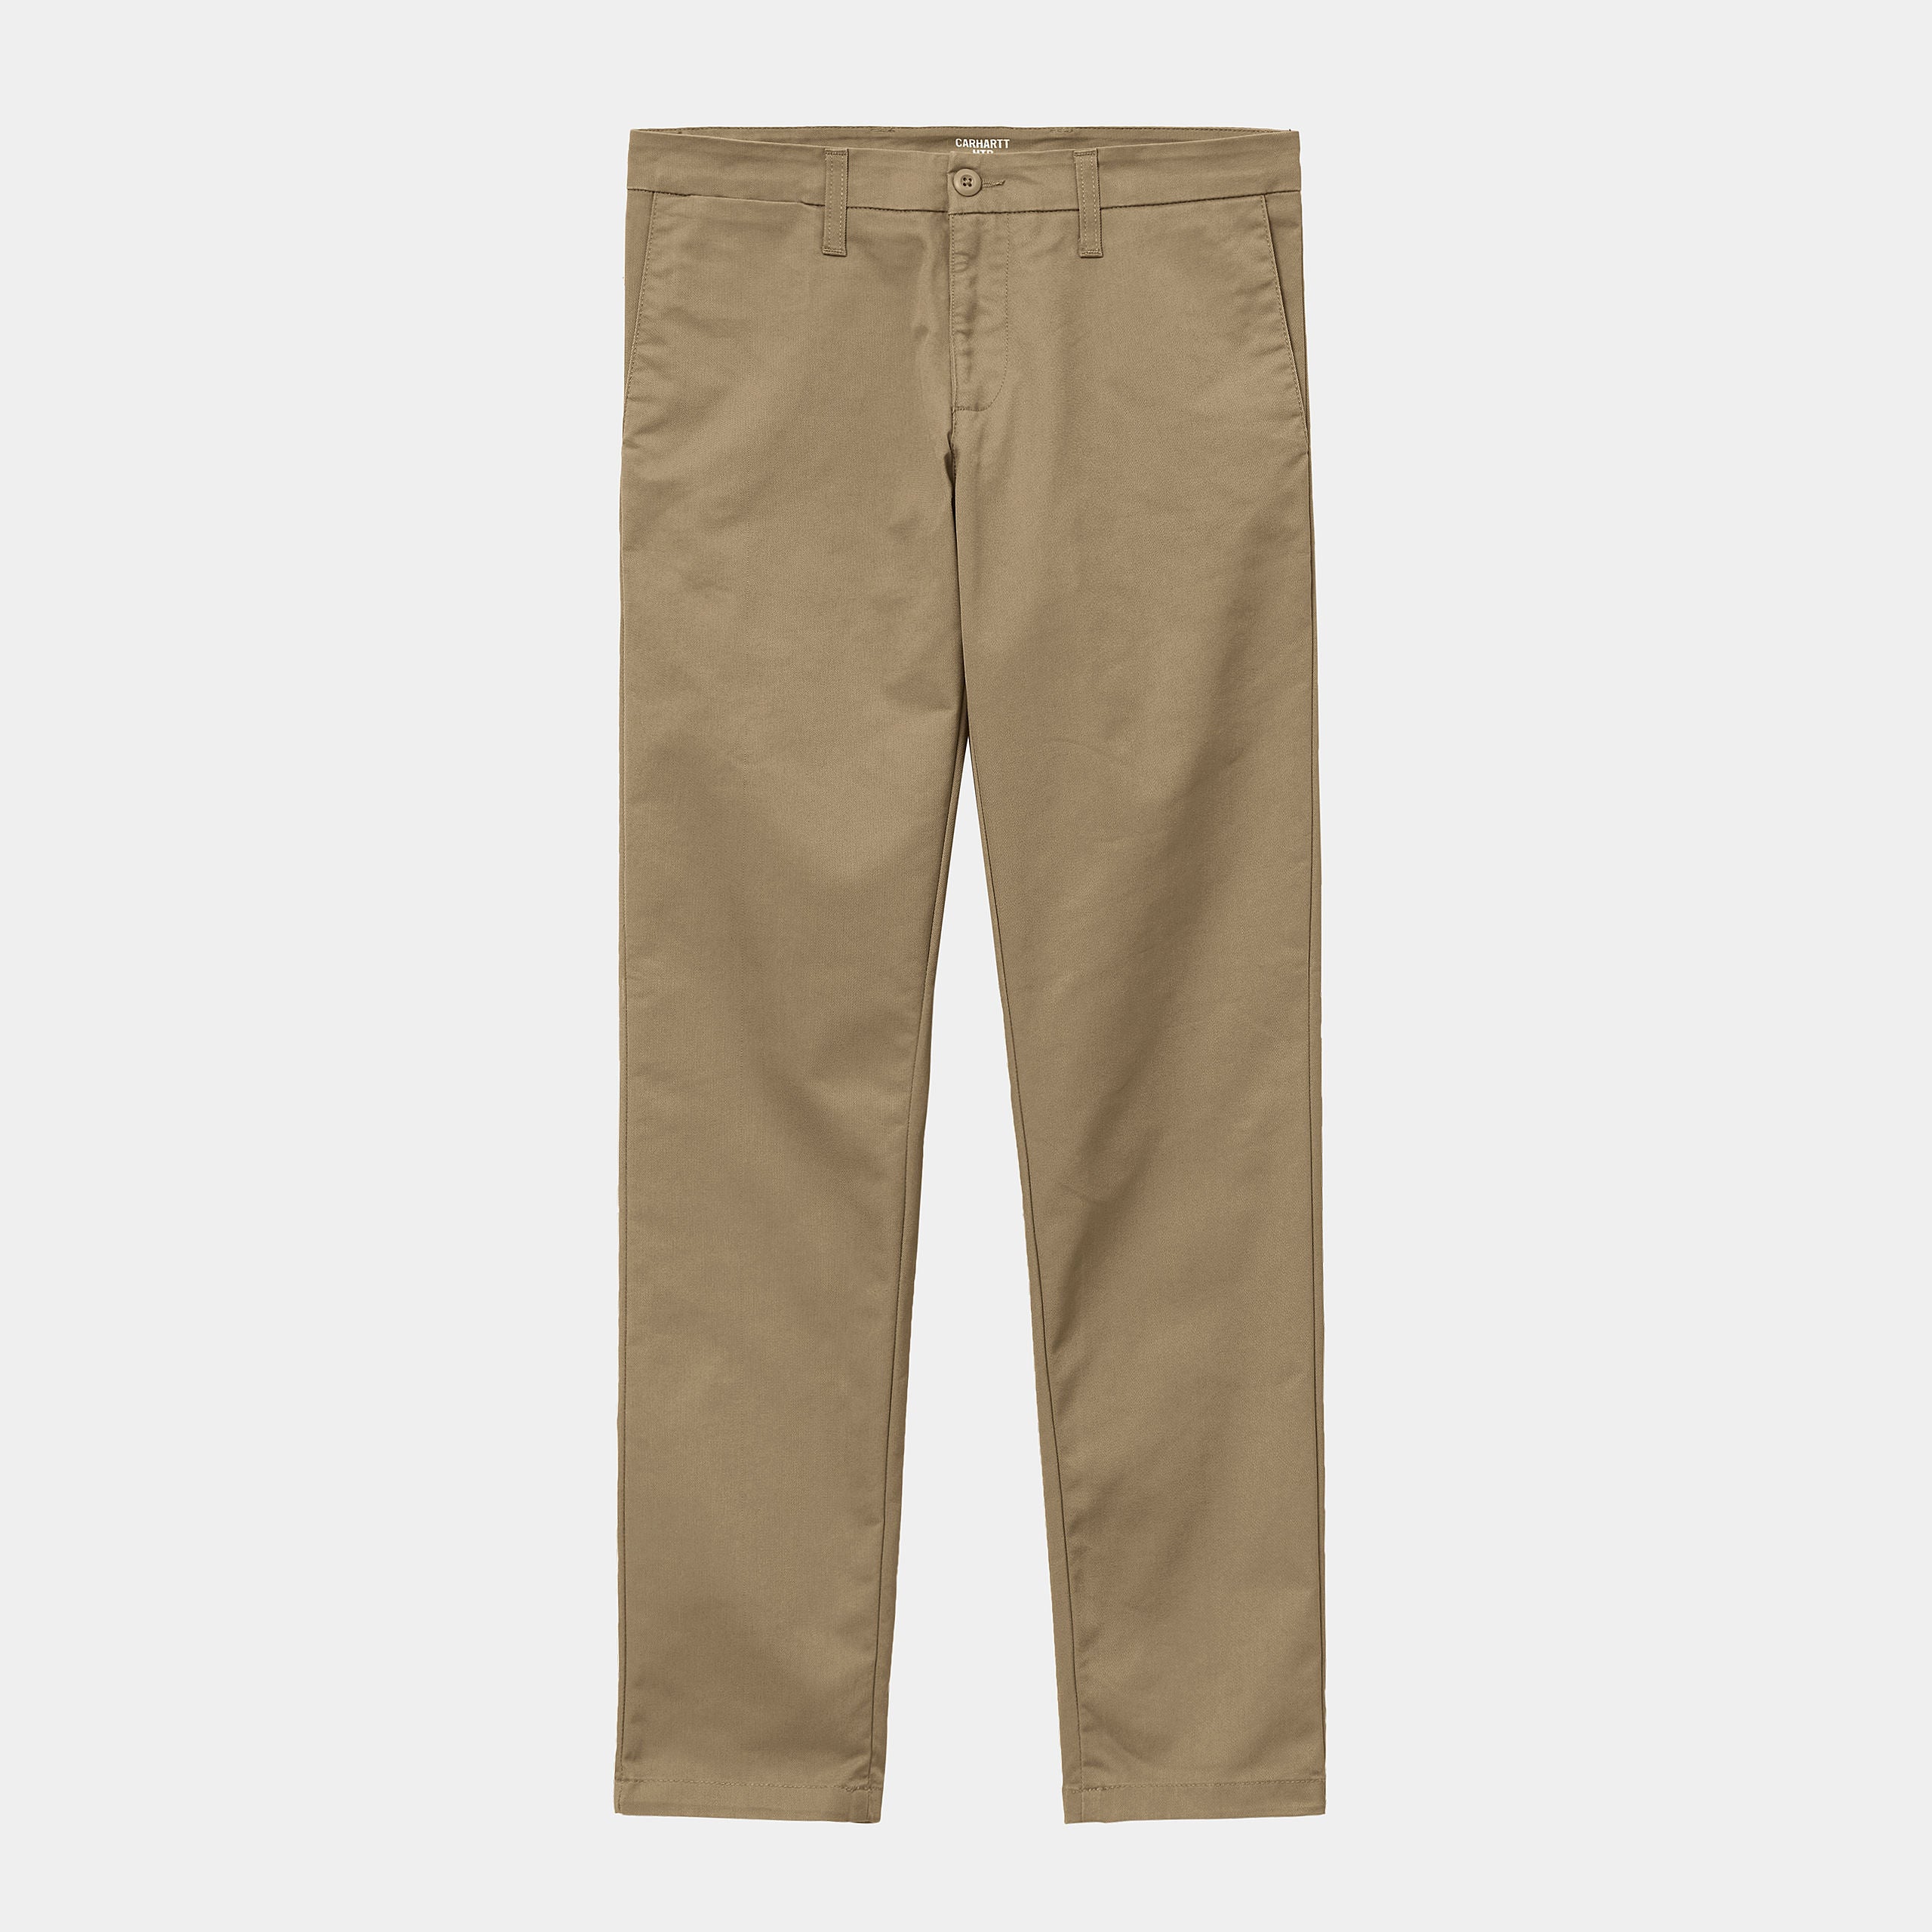 Carhartt Sid Pant Leather (Rinsed)